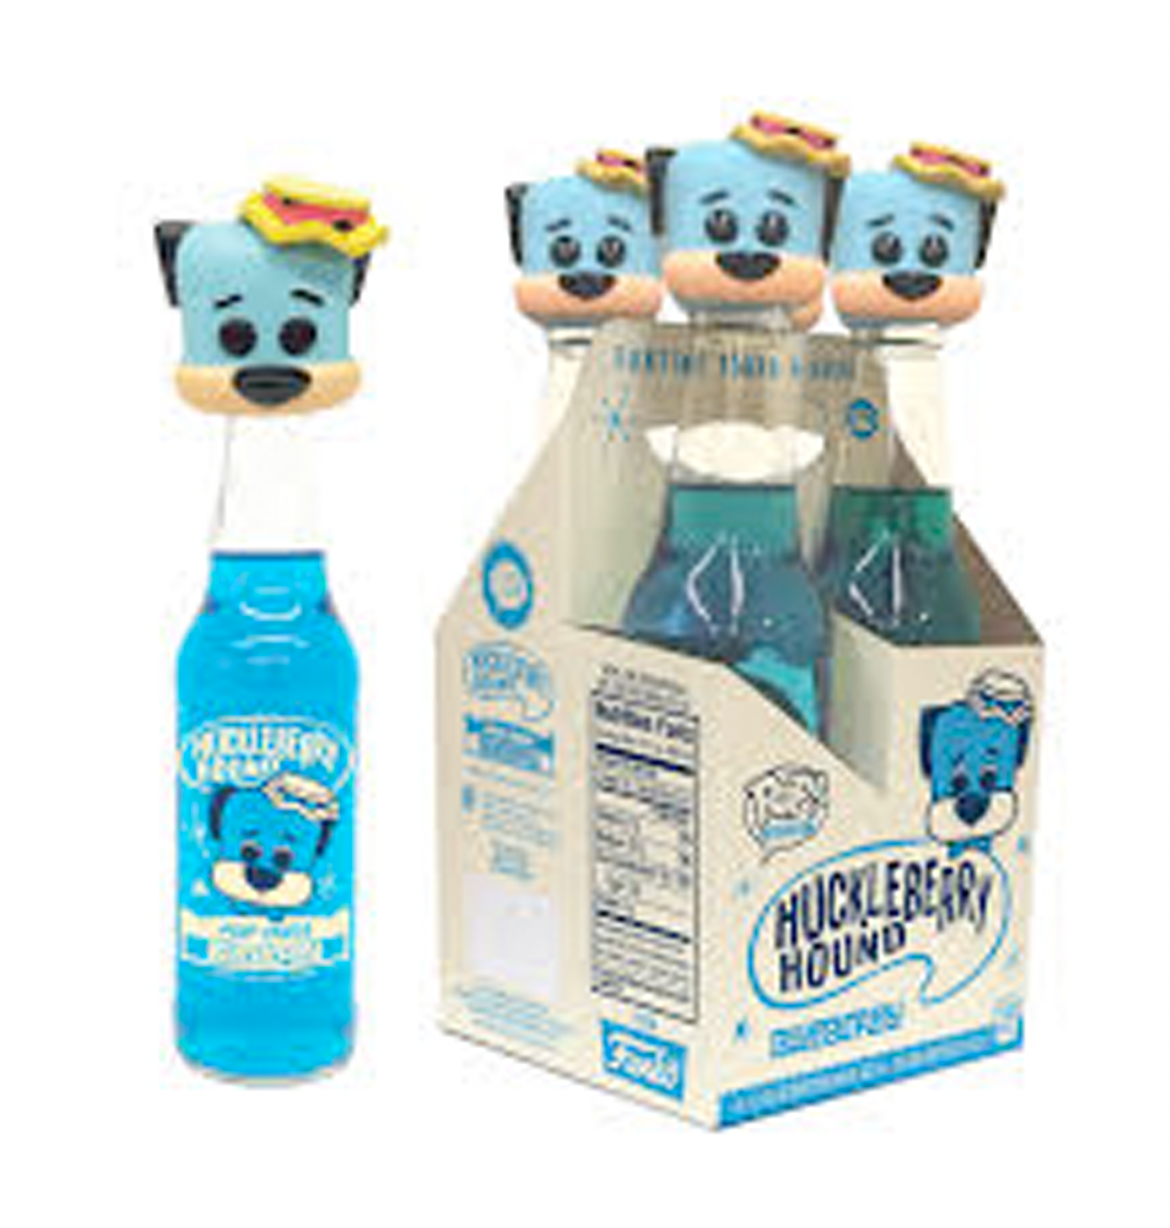 Funko 4 Pack of Huckleberry Hound Blueberry Soda SDCC Pop Up Shop Exclusive